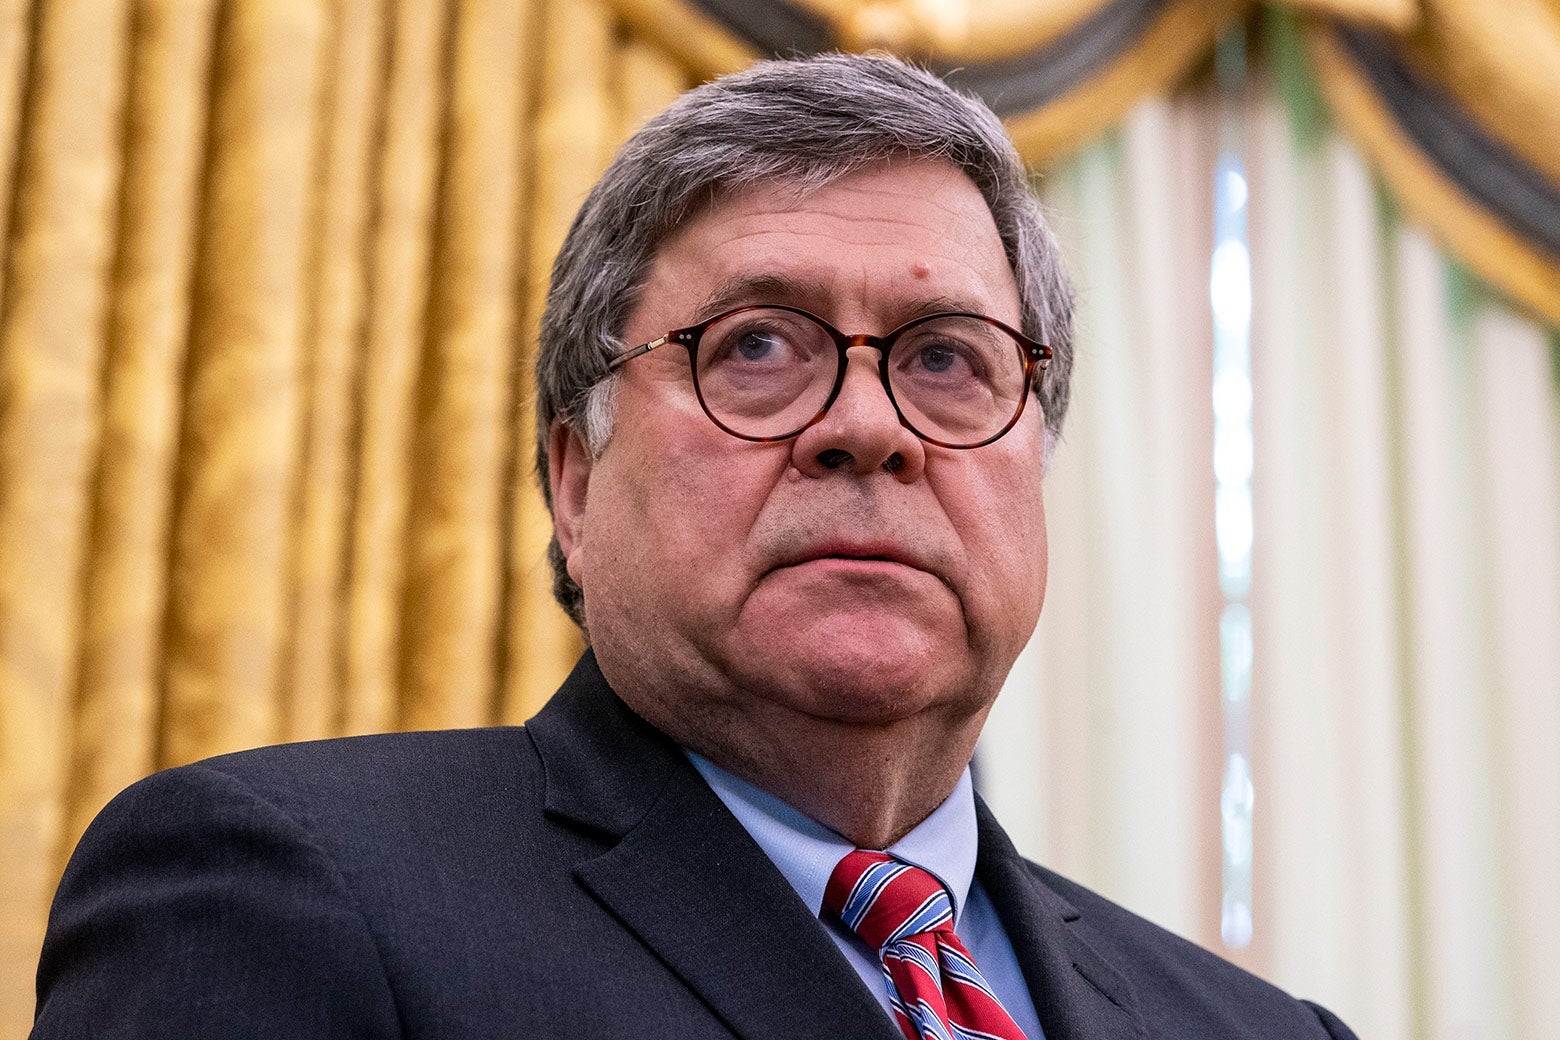 Barr stands in the Oval Office